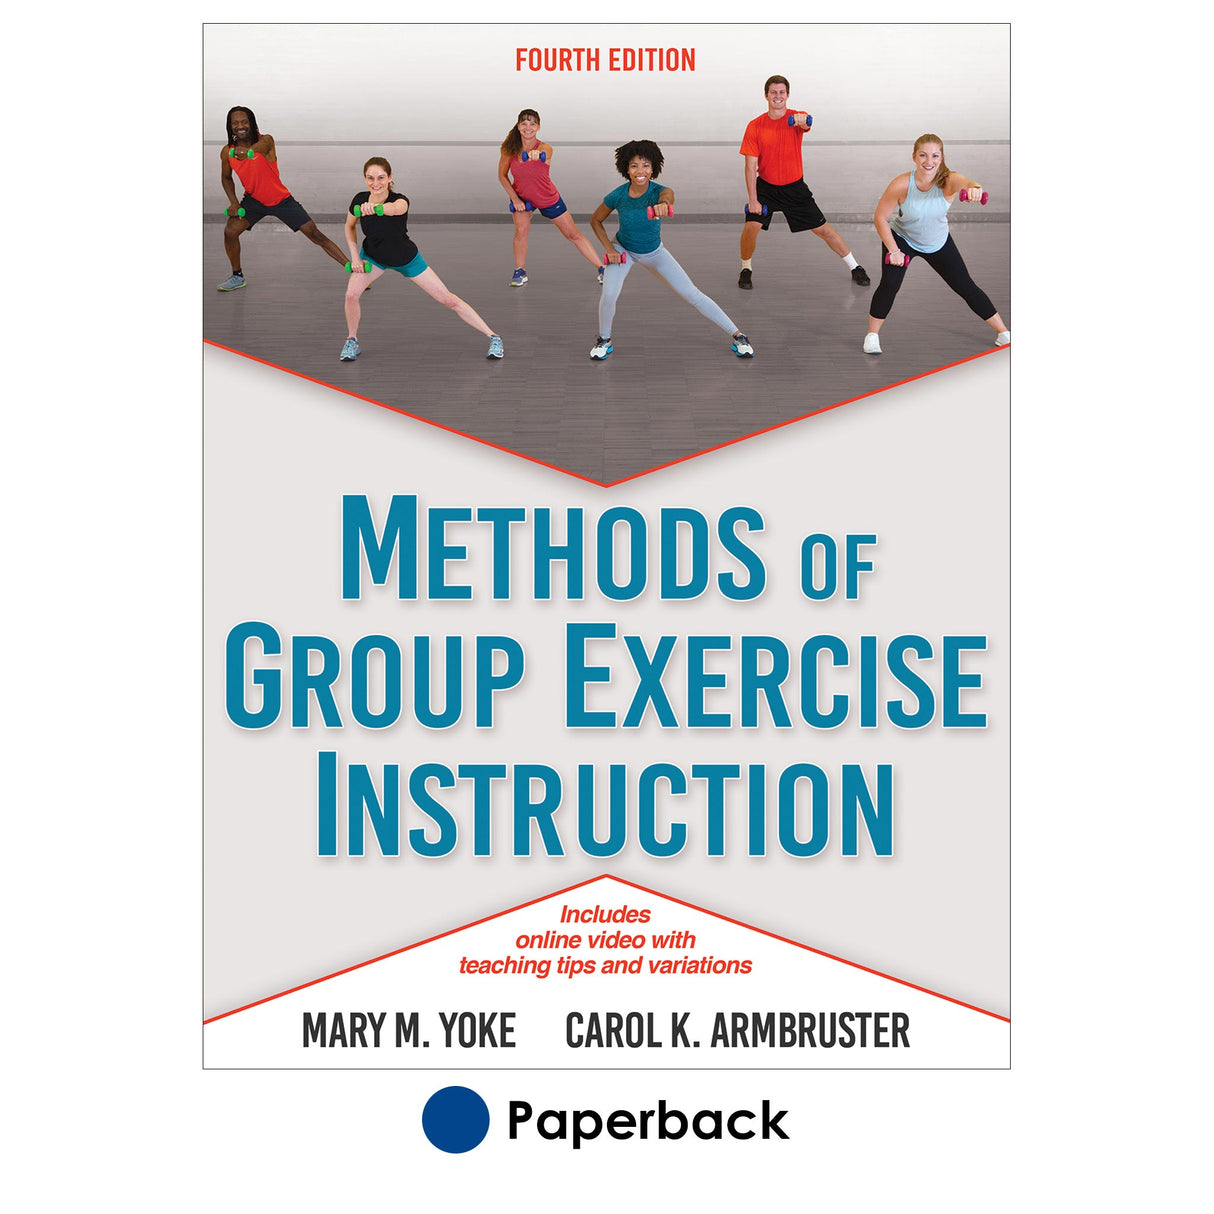 Methods of Group Exercise Instruction 4th Edition With Online Video